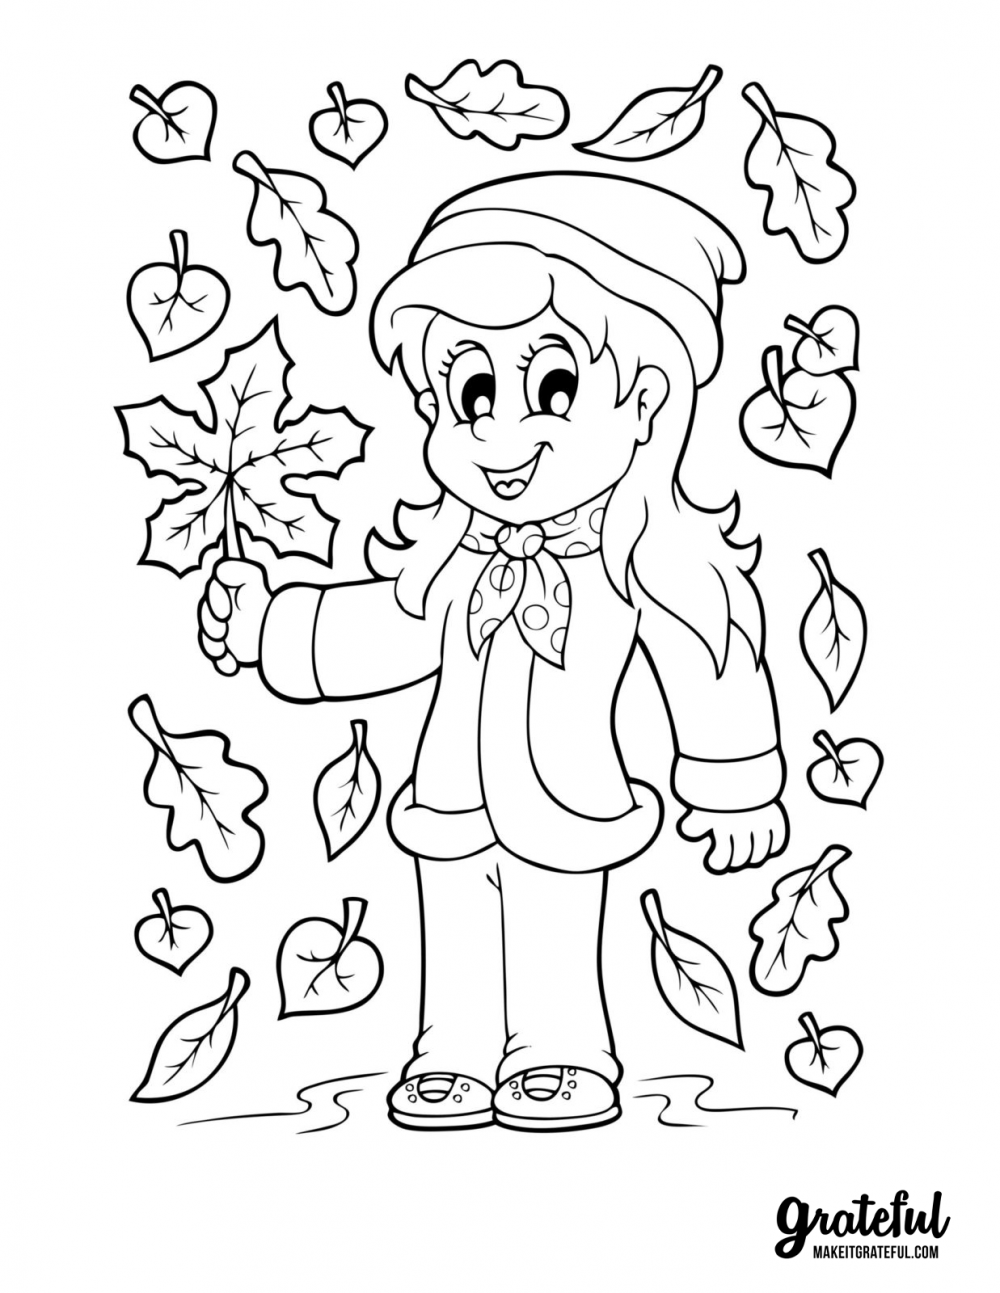 Girl in fall leaves - Thanksgiving coloring pages